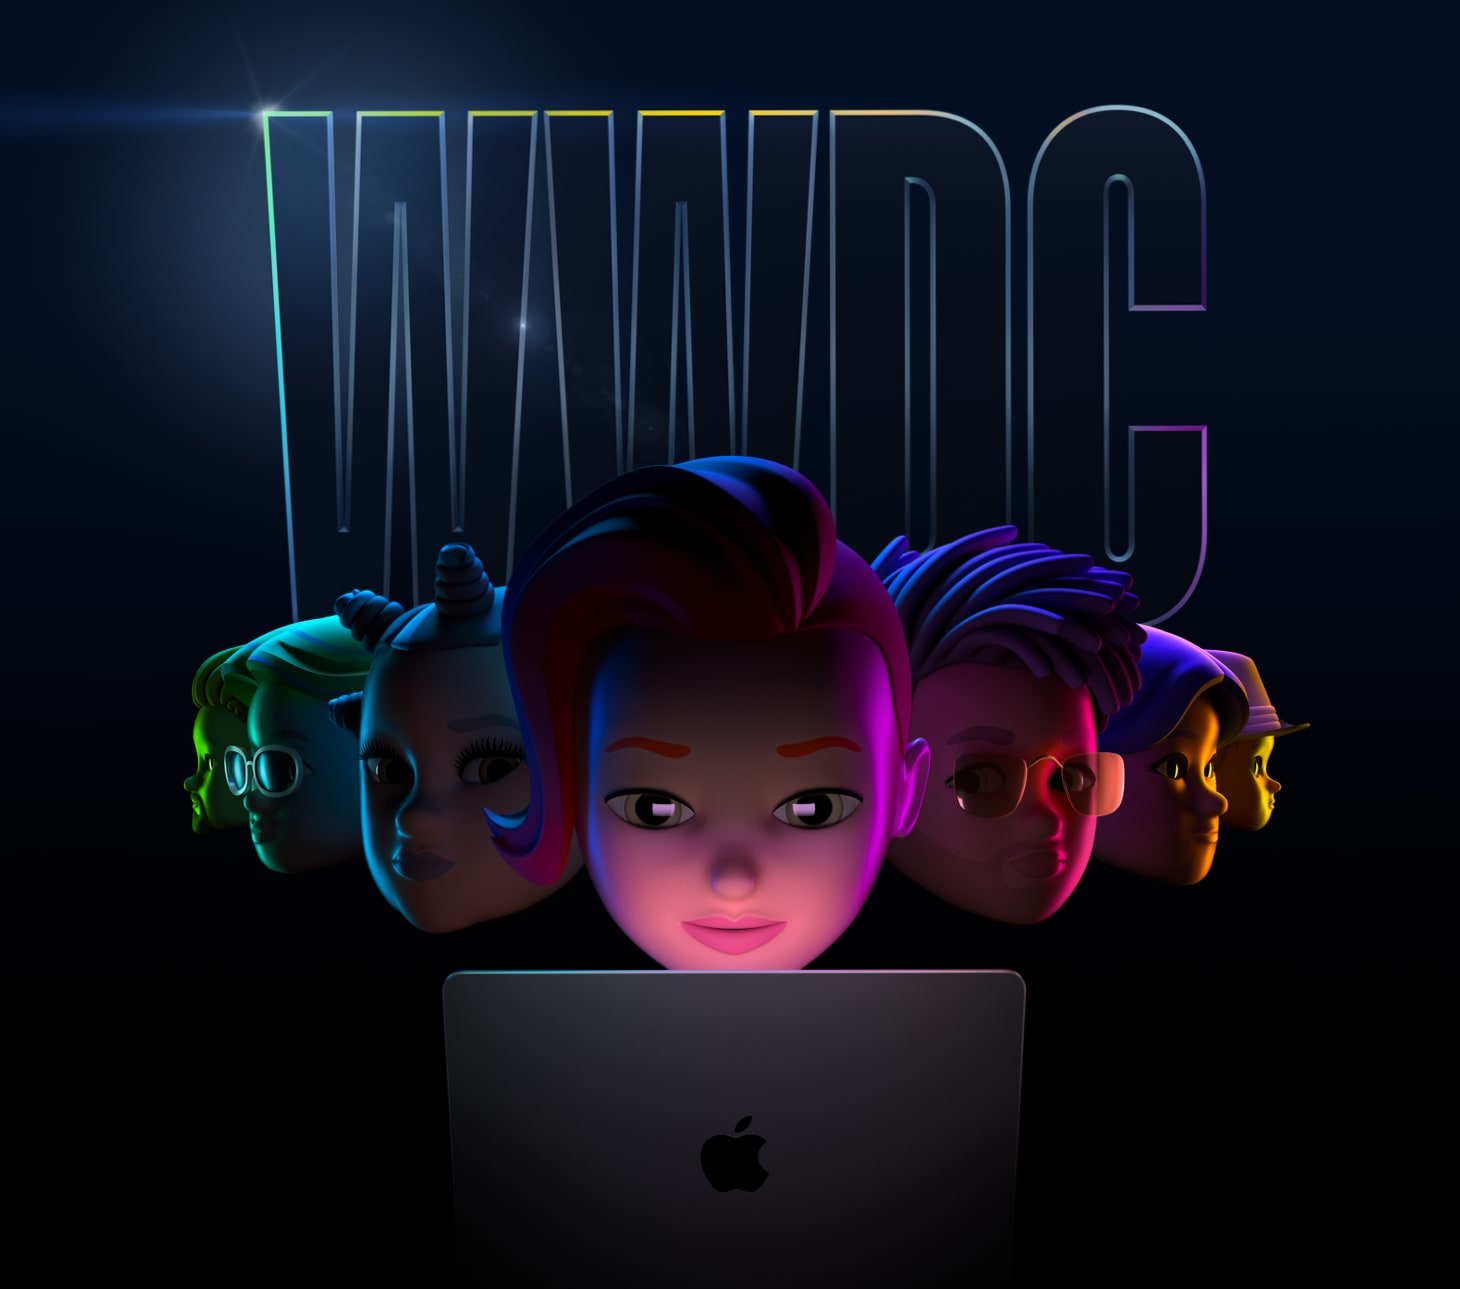 Marketing image showing developer Memojis gathered around a notebook, set against a dark background with "WWDC" printed on it